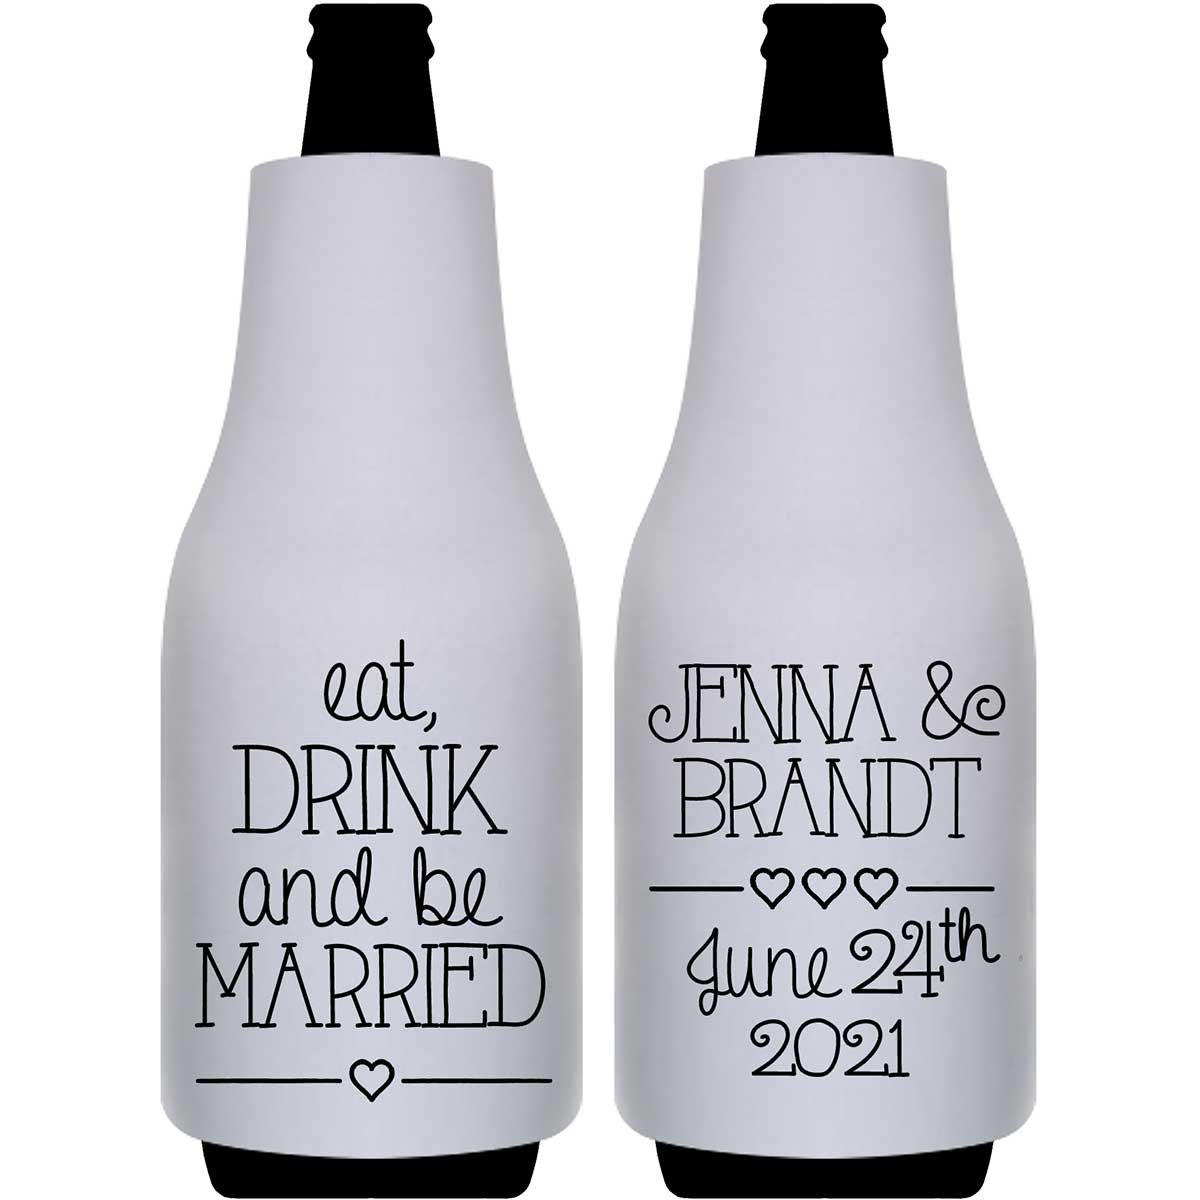 Eat Drink And Be Married 5A Foldable Bottle Sleeve Koozies Wedding Gifts for Guests